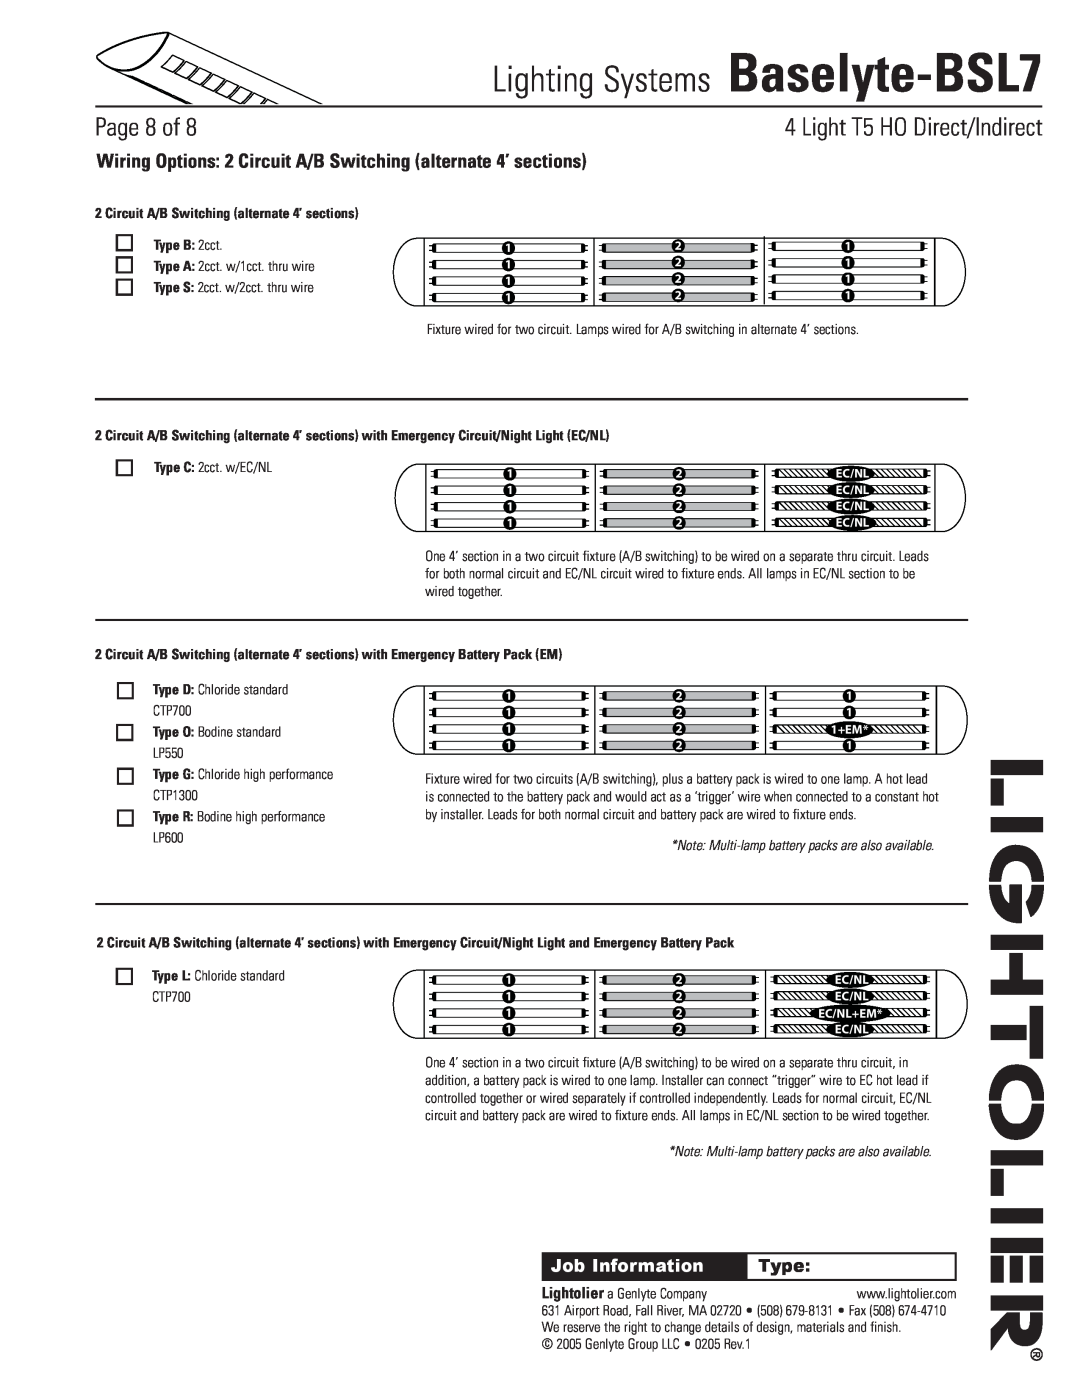 Lightolier Baselyte-BSL7 Circuit A/B Switching alternate 4’ sections, Type B 2cct, Type O Bodine standard LP550, Page of 